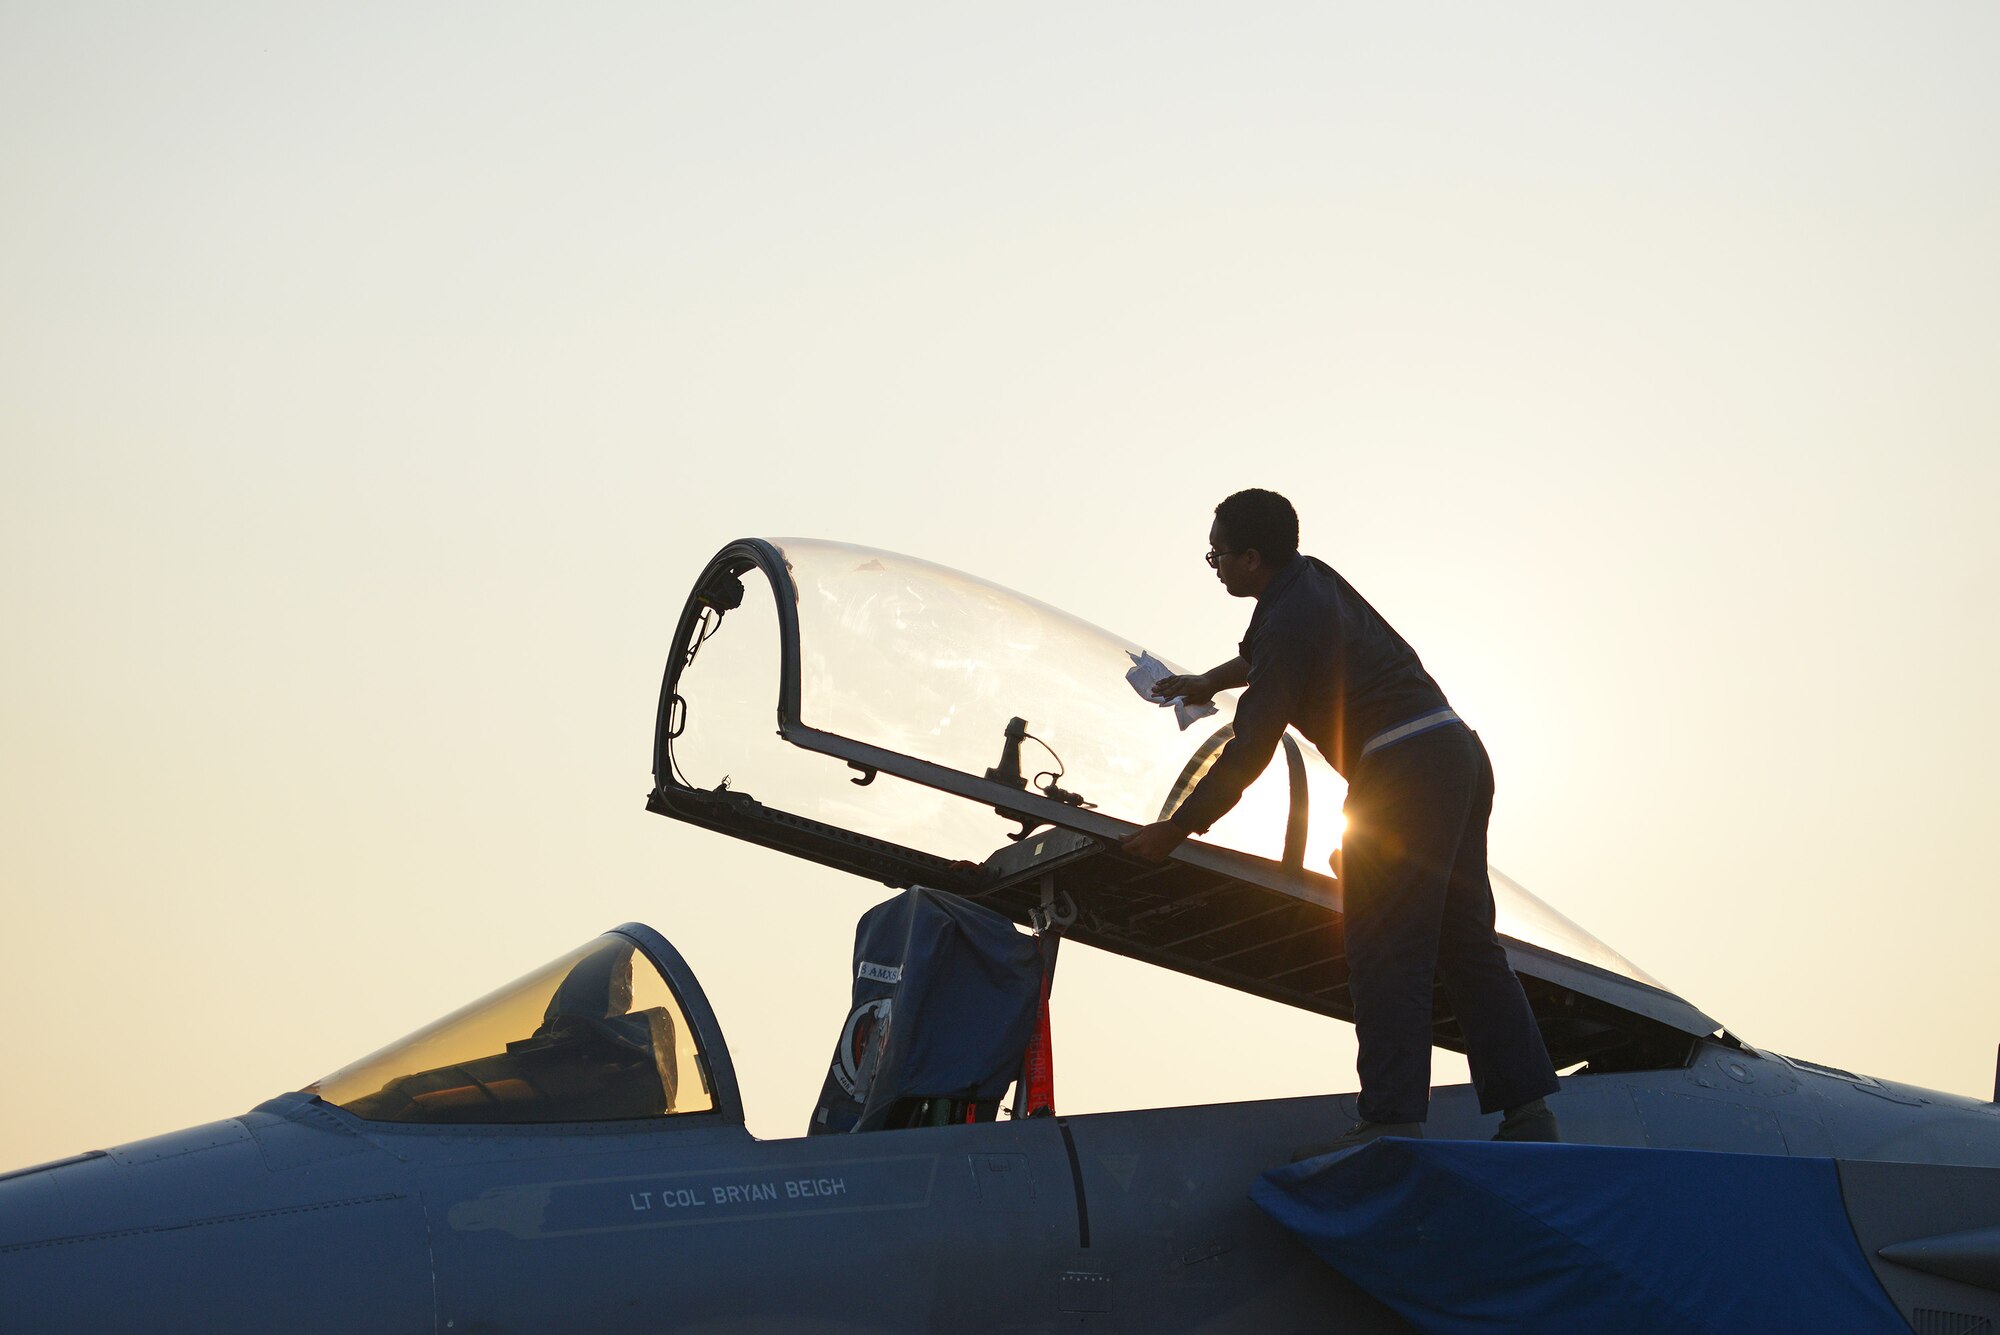 U.S. Air Force Airman 1st Class Allen Shipman, an F-15C Eagle crew chief from the 44th Fighter Squadron, Kadena Air Base, Japan, cleans a canapoy during COPE TIGER 2018 at Korat Air Base, Thailand, March 20, 2018.